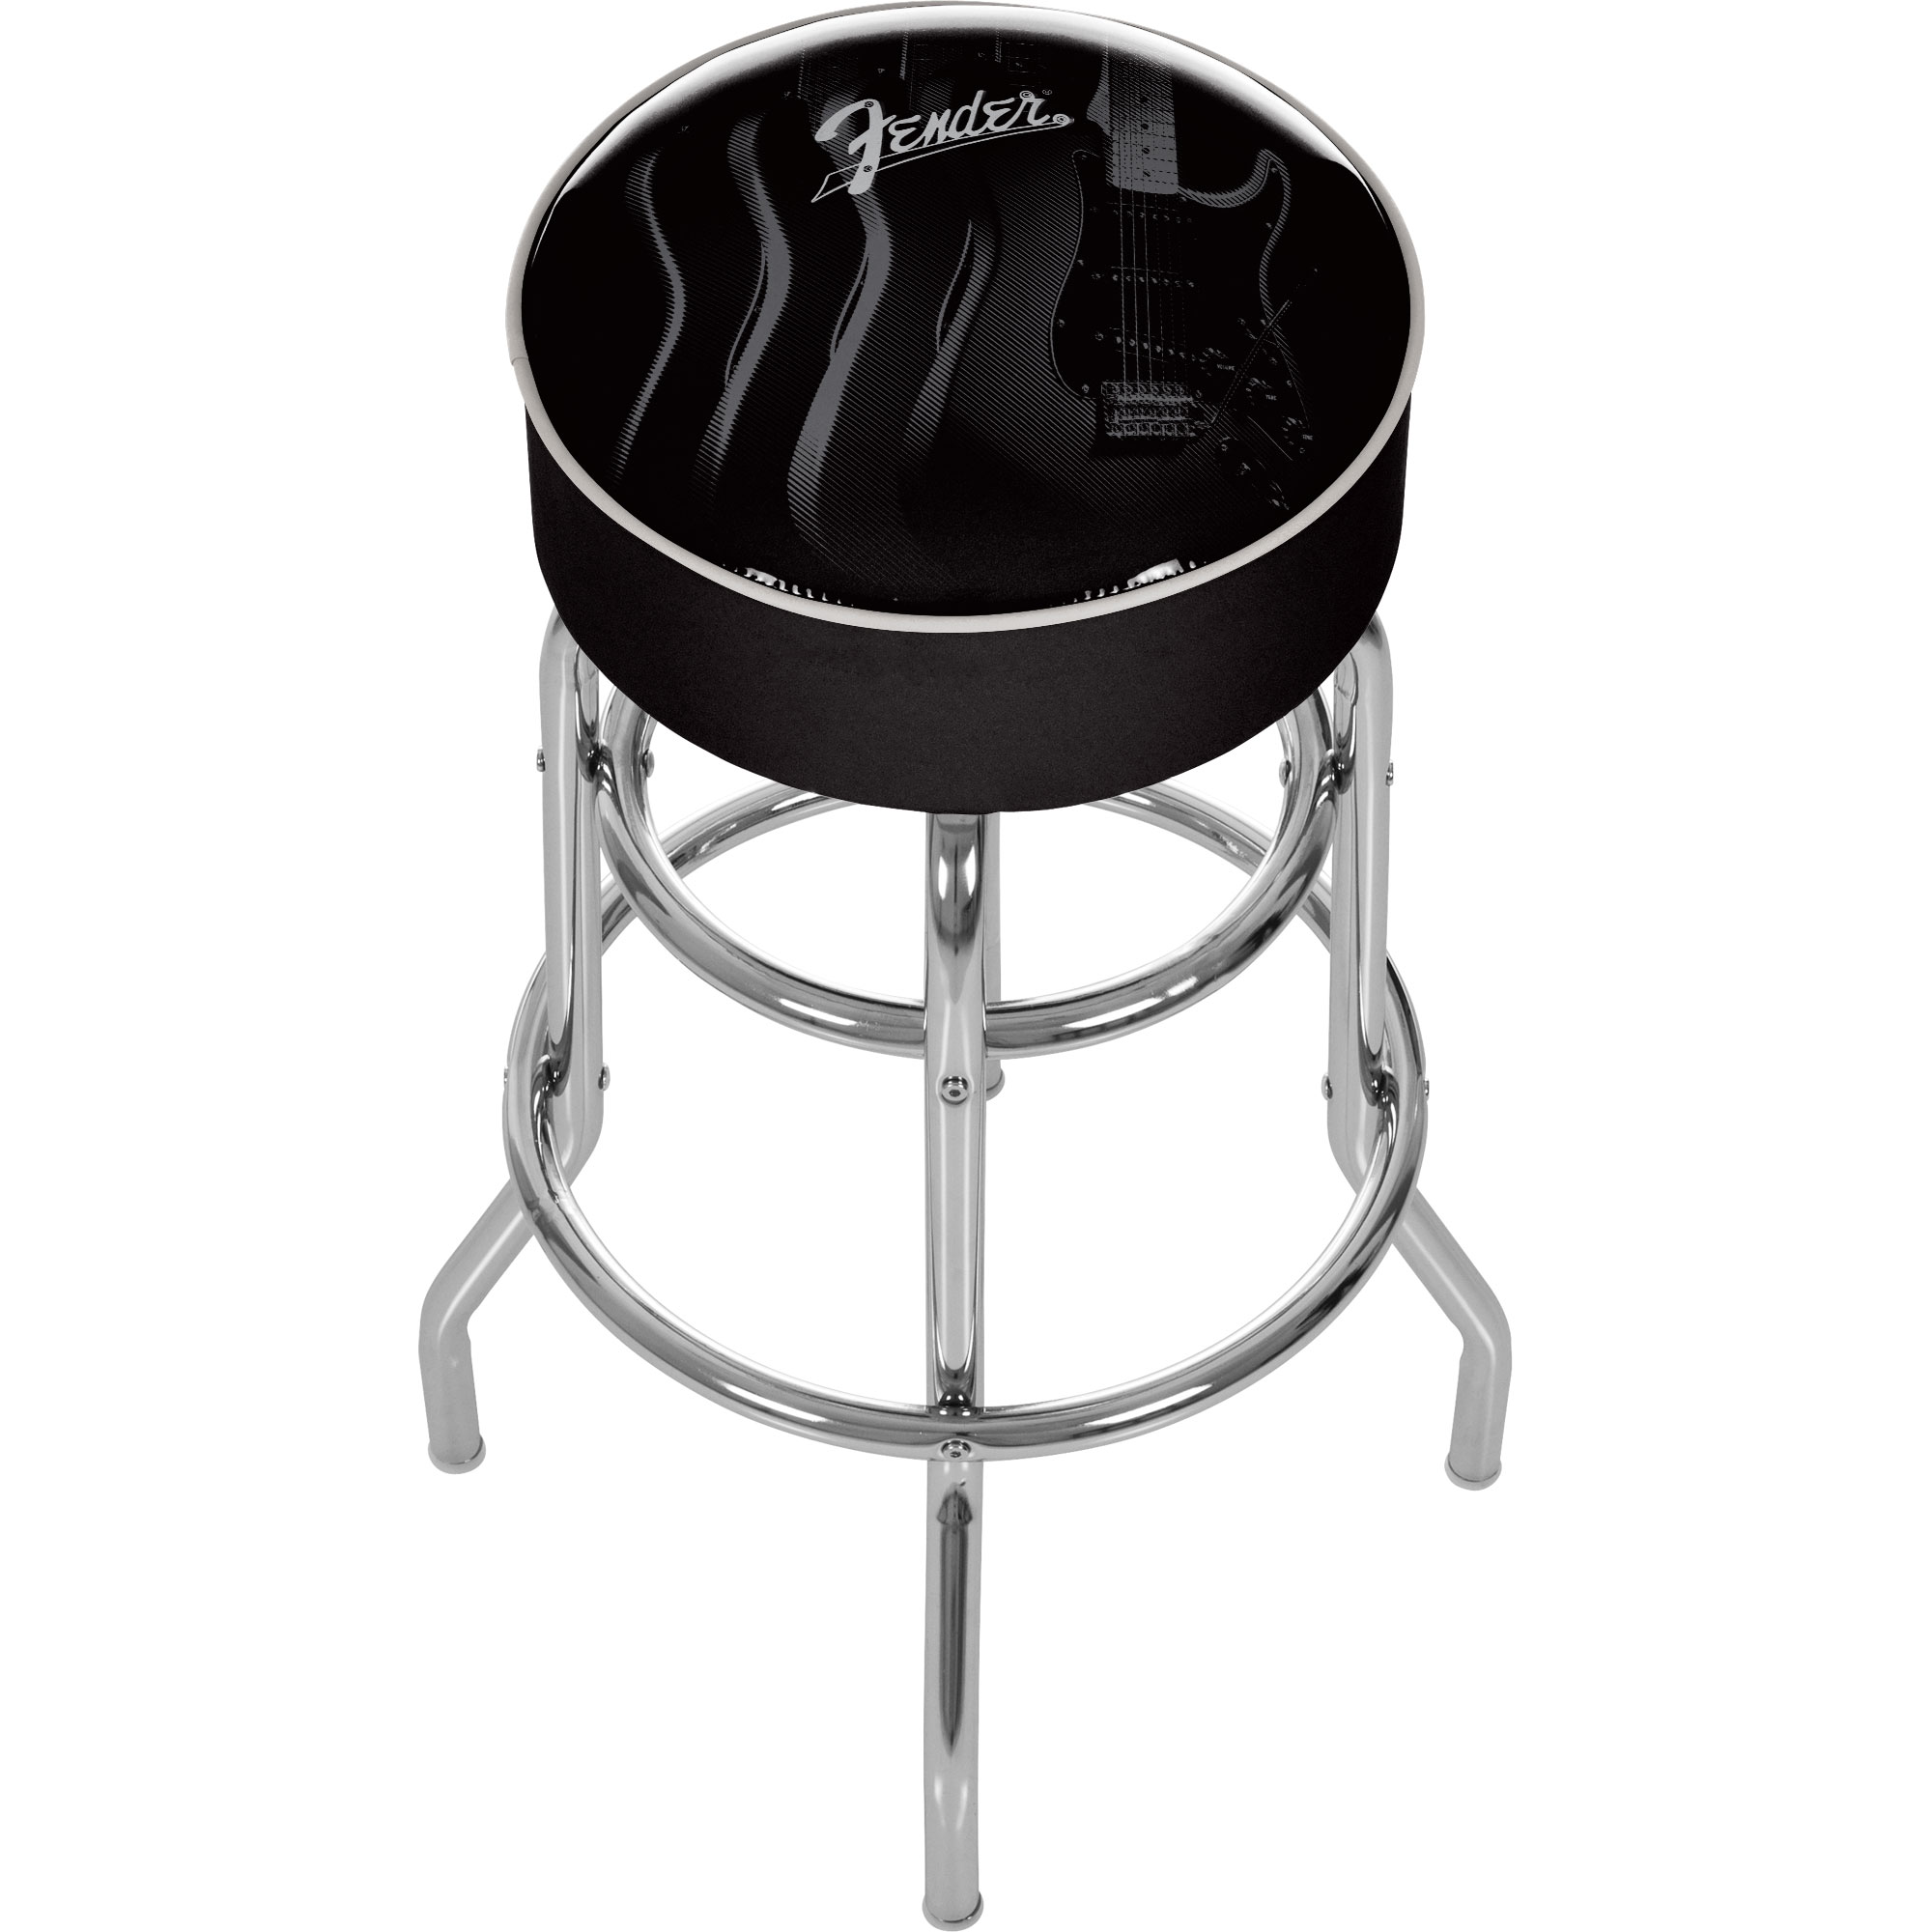 Trademark Fender Stratocasters Galore Padded Bar Stool - Made In USA